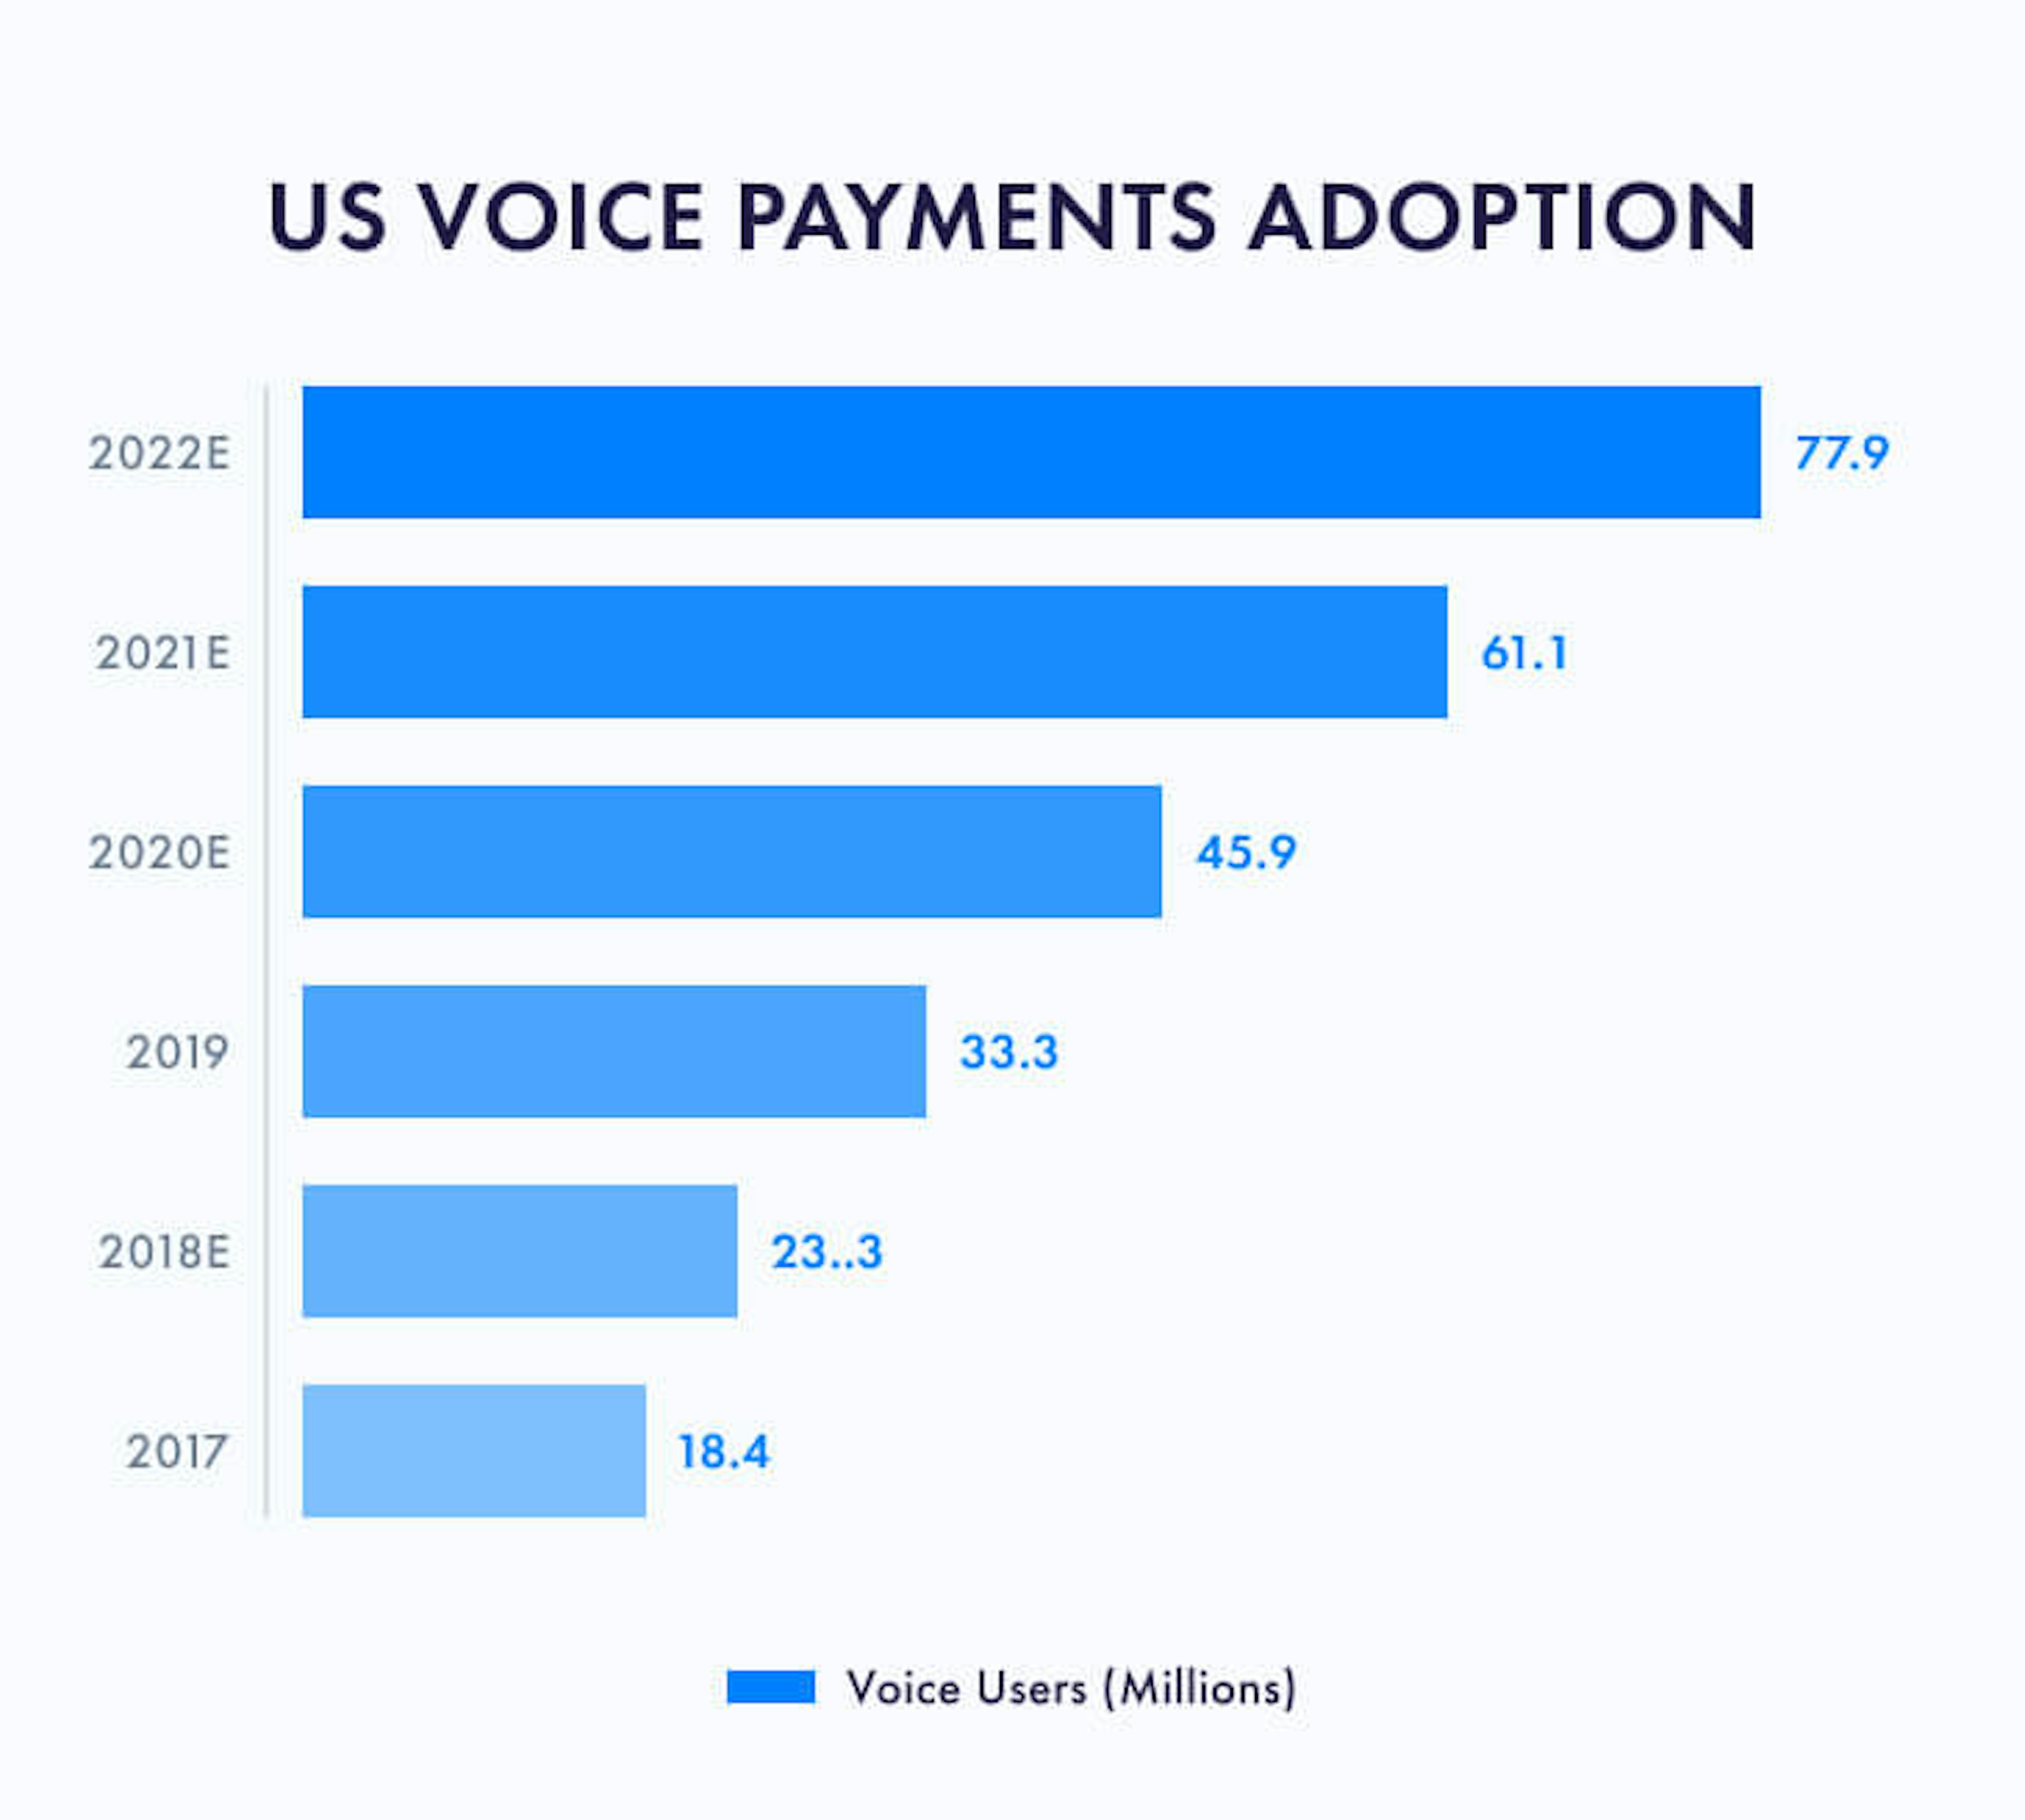 Payments adoption